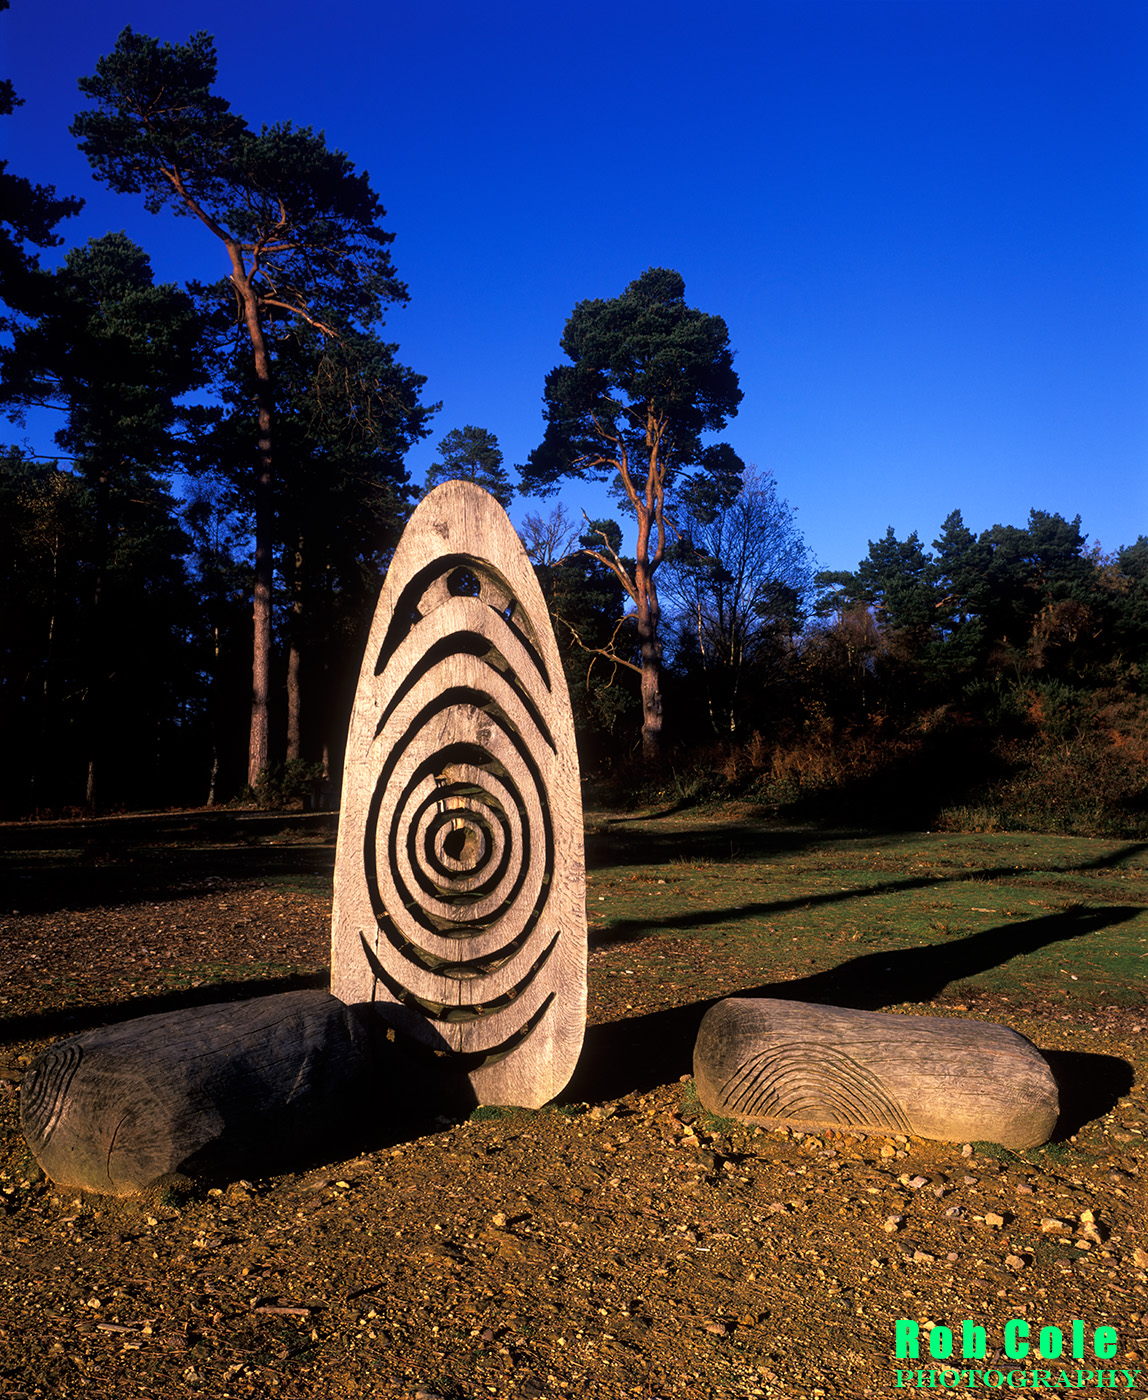 A carved wooden sculpture on Leith Hill